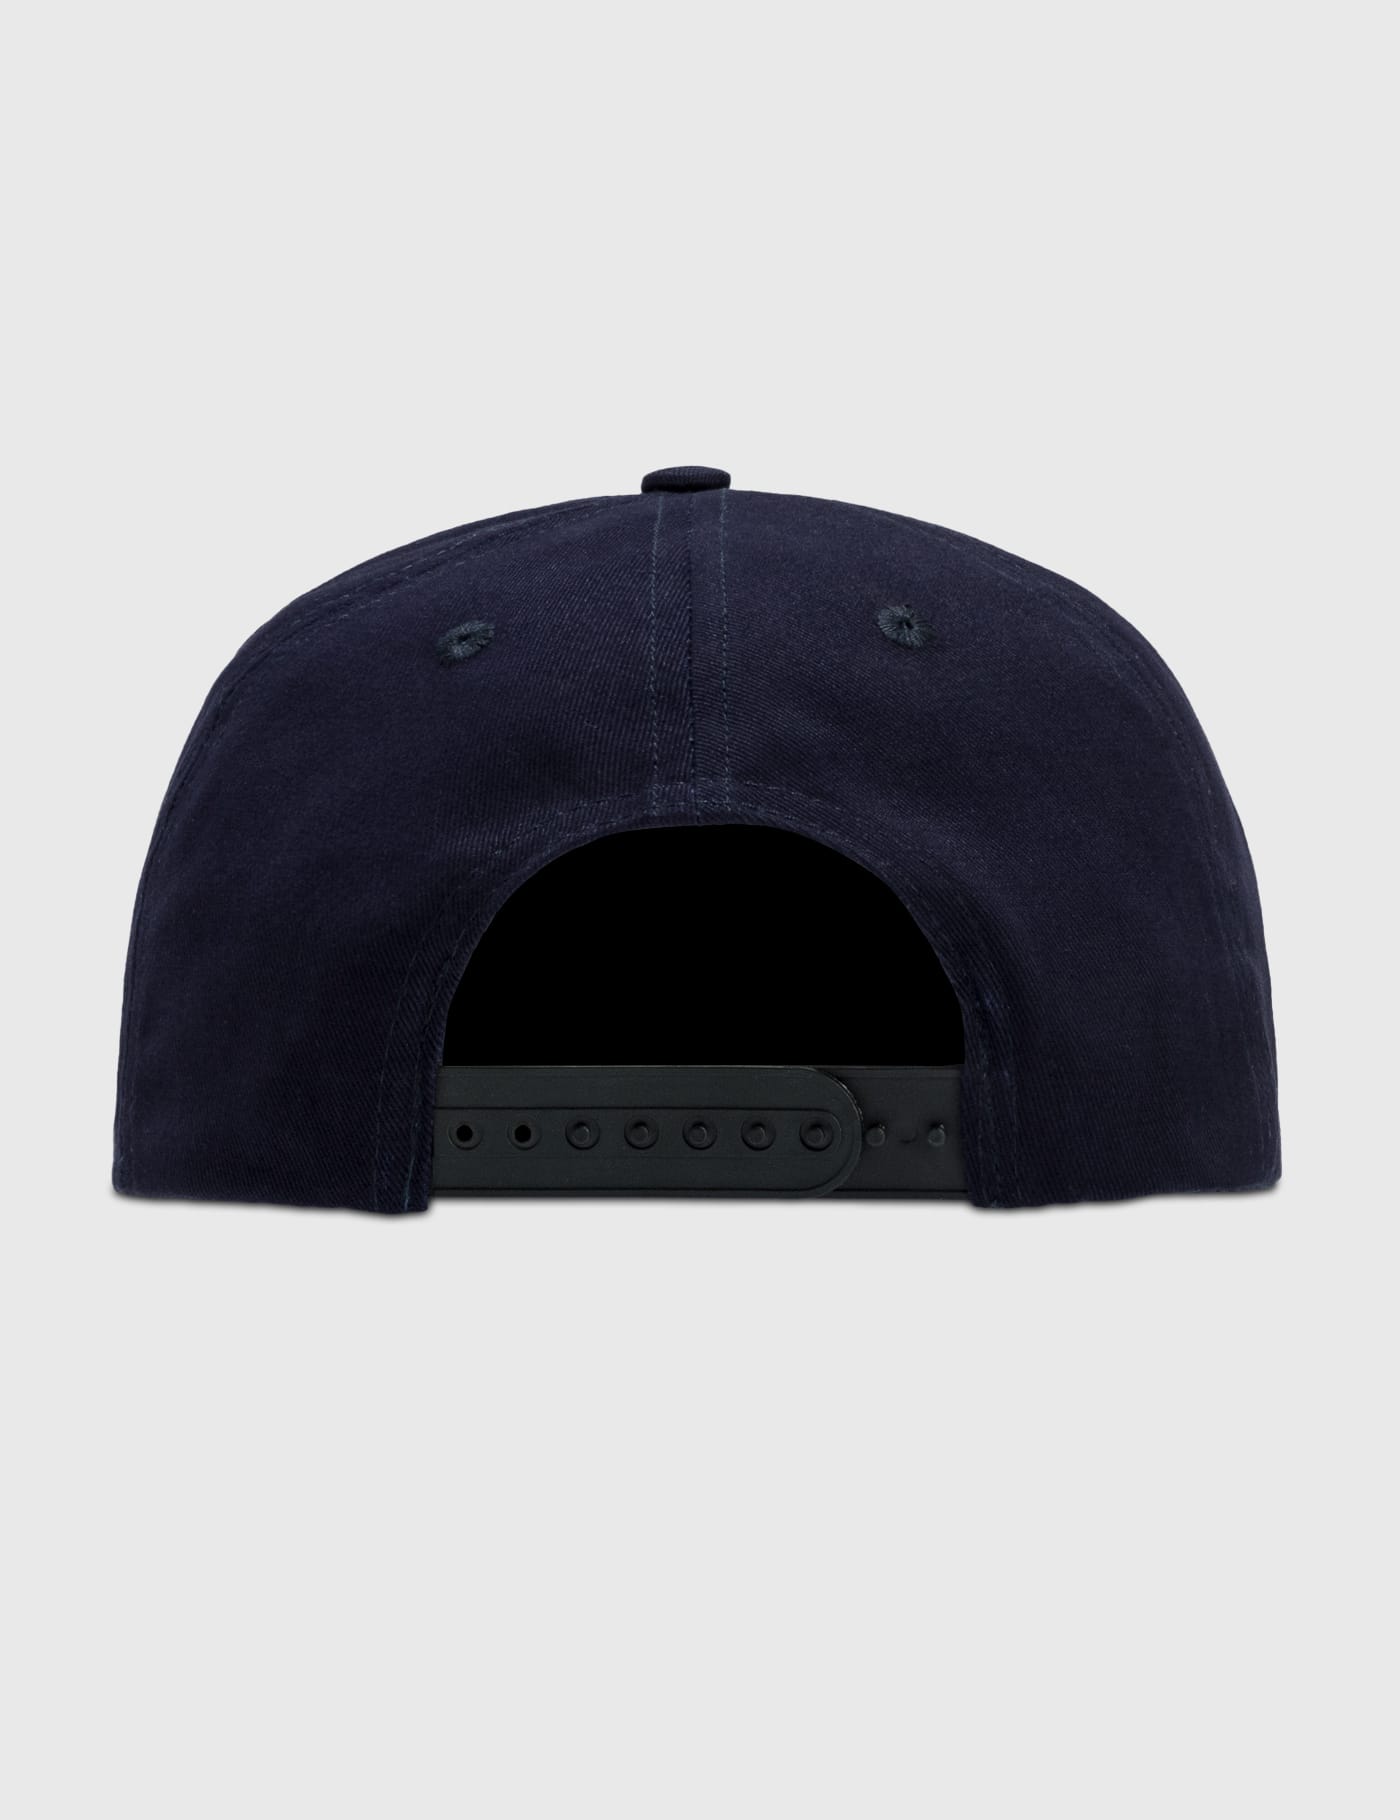 Thames MMXX - Tourist Cap | HBX - Globally Curated Fashion and